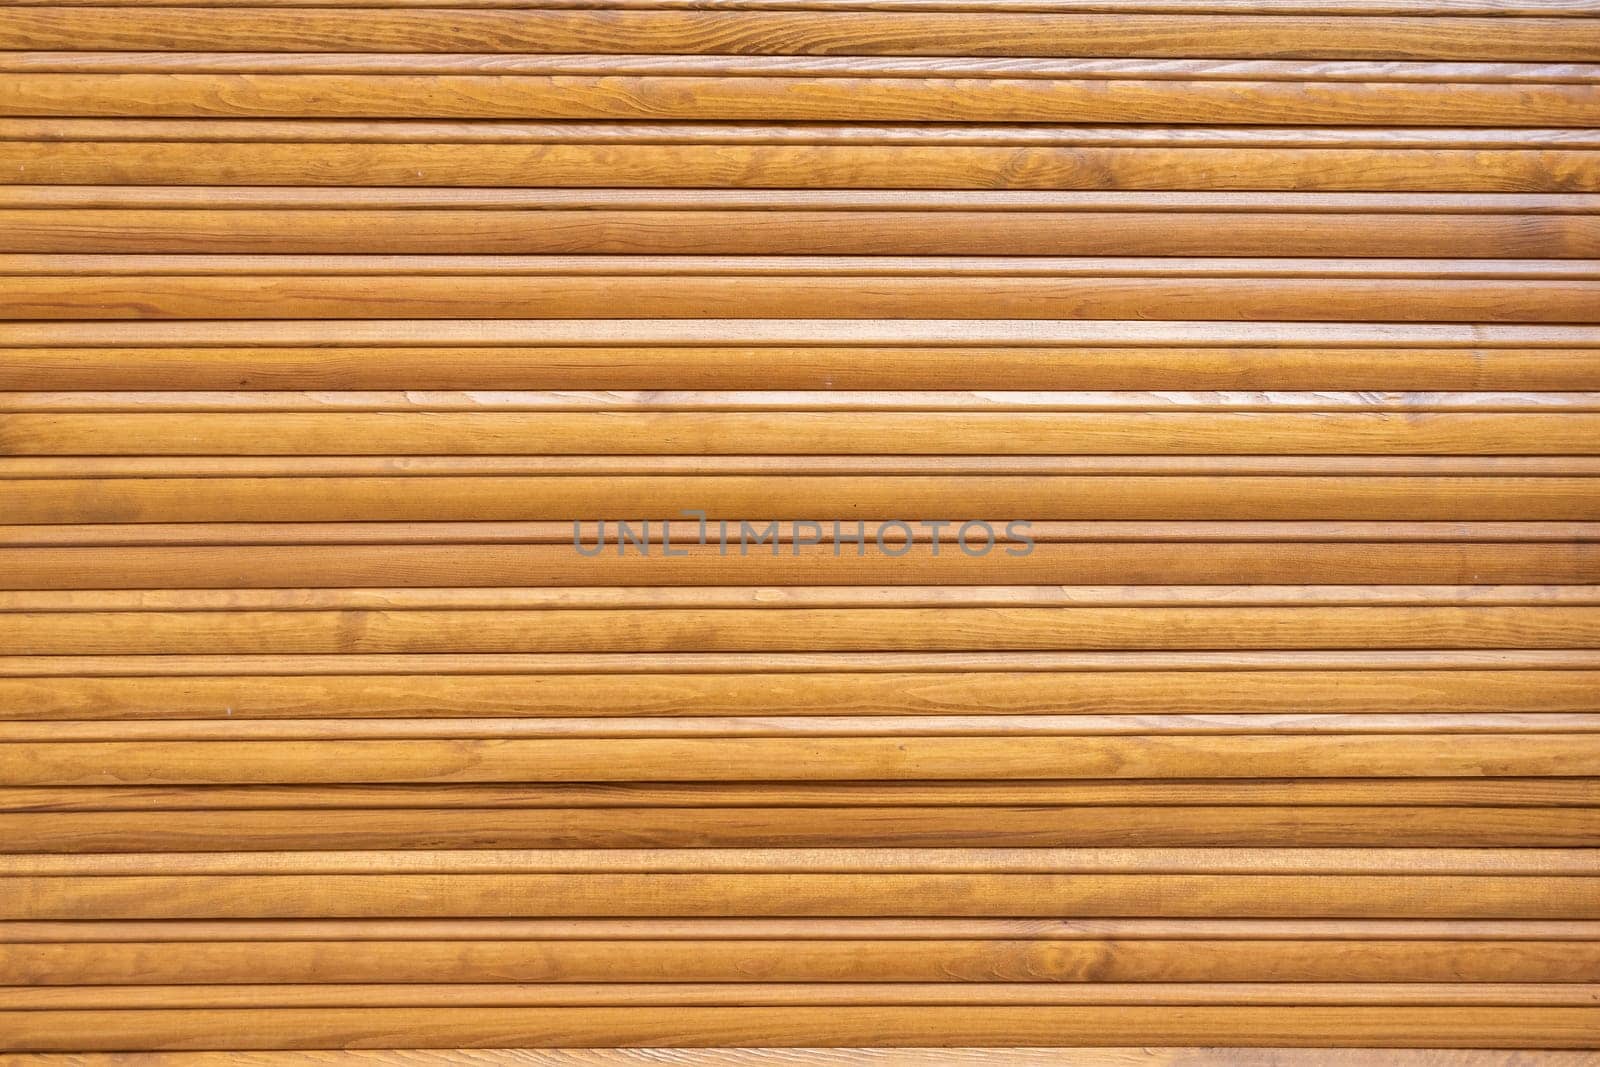 The surface is made of well-preserved light wooden slats. Background or texture for further graphic work